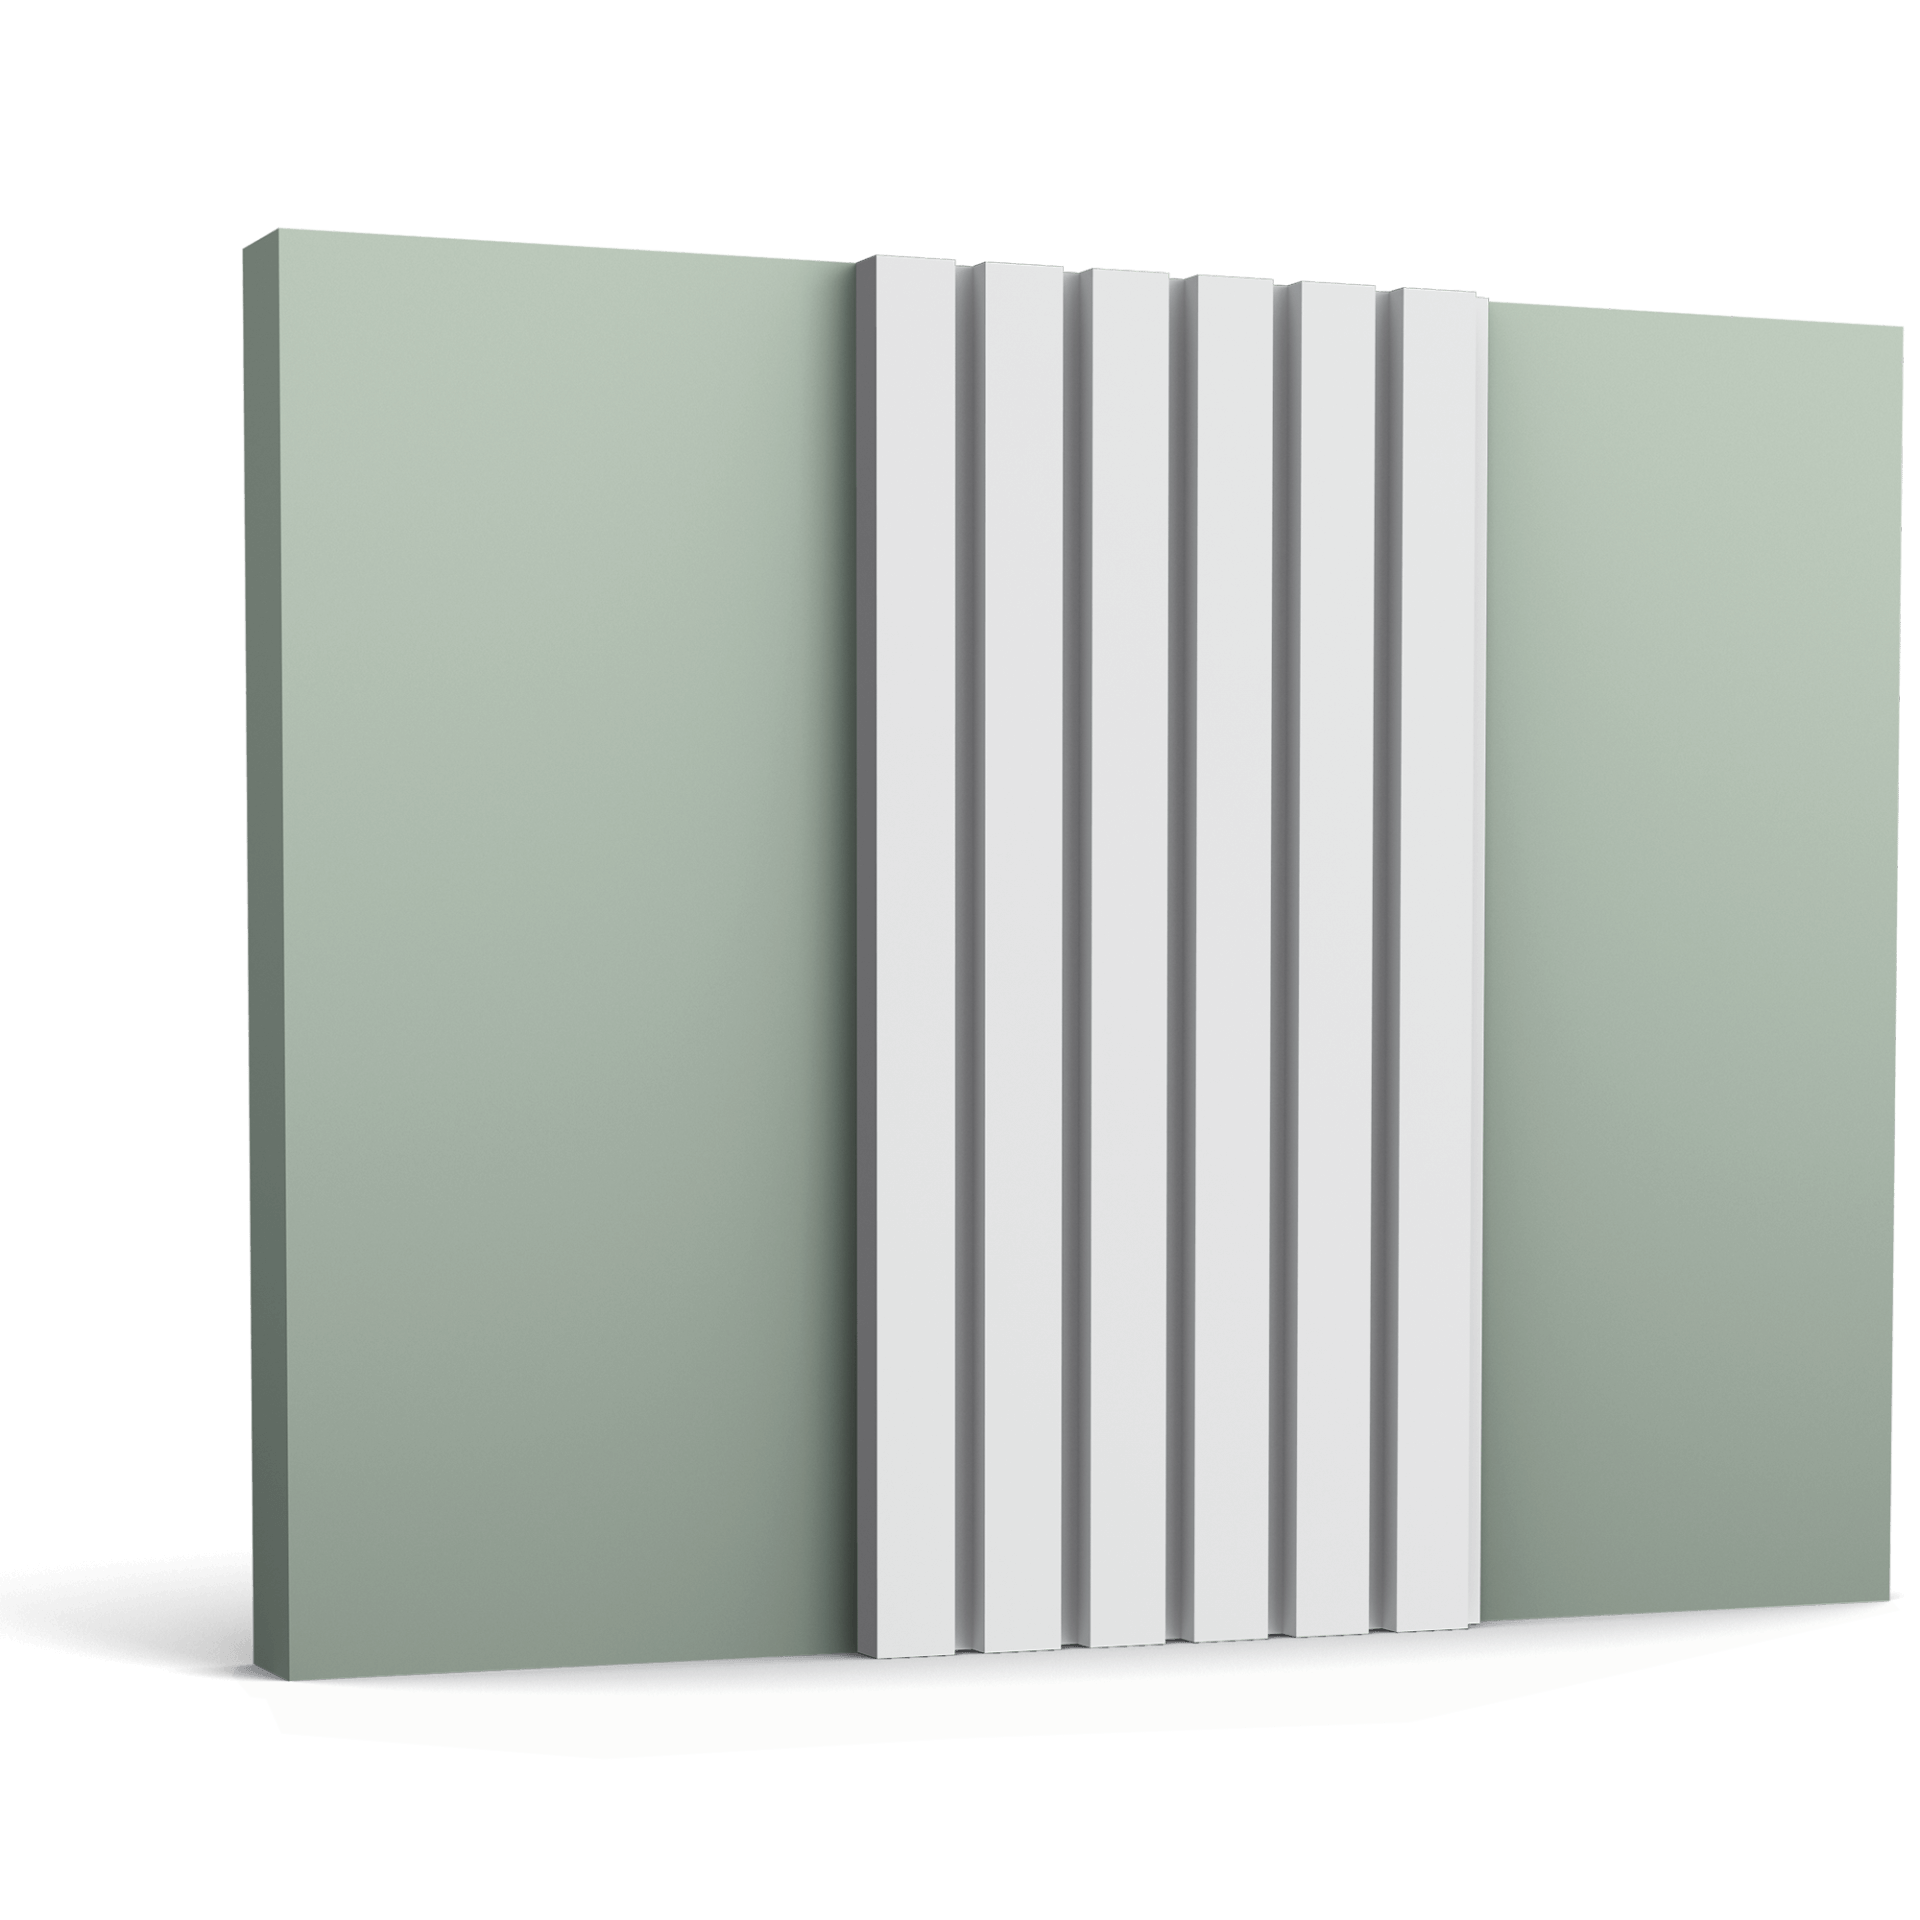 The W111 BAR is the straightforward addition to ZIGZAG, VALLEY and HILL profiles. Designed to fit perfectly with CX190 and SX194 it offers endless possibilities and fast finishing. Cover wall sections from top to bottom to add give an immediate wow effect to any room or use.